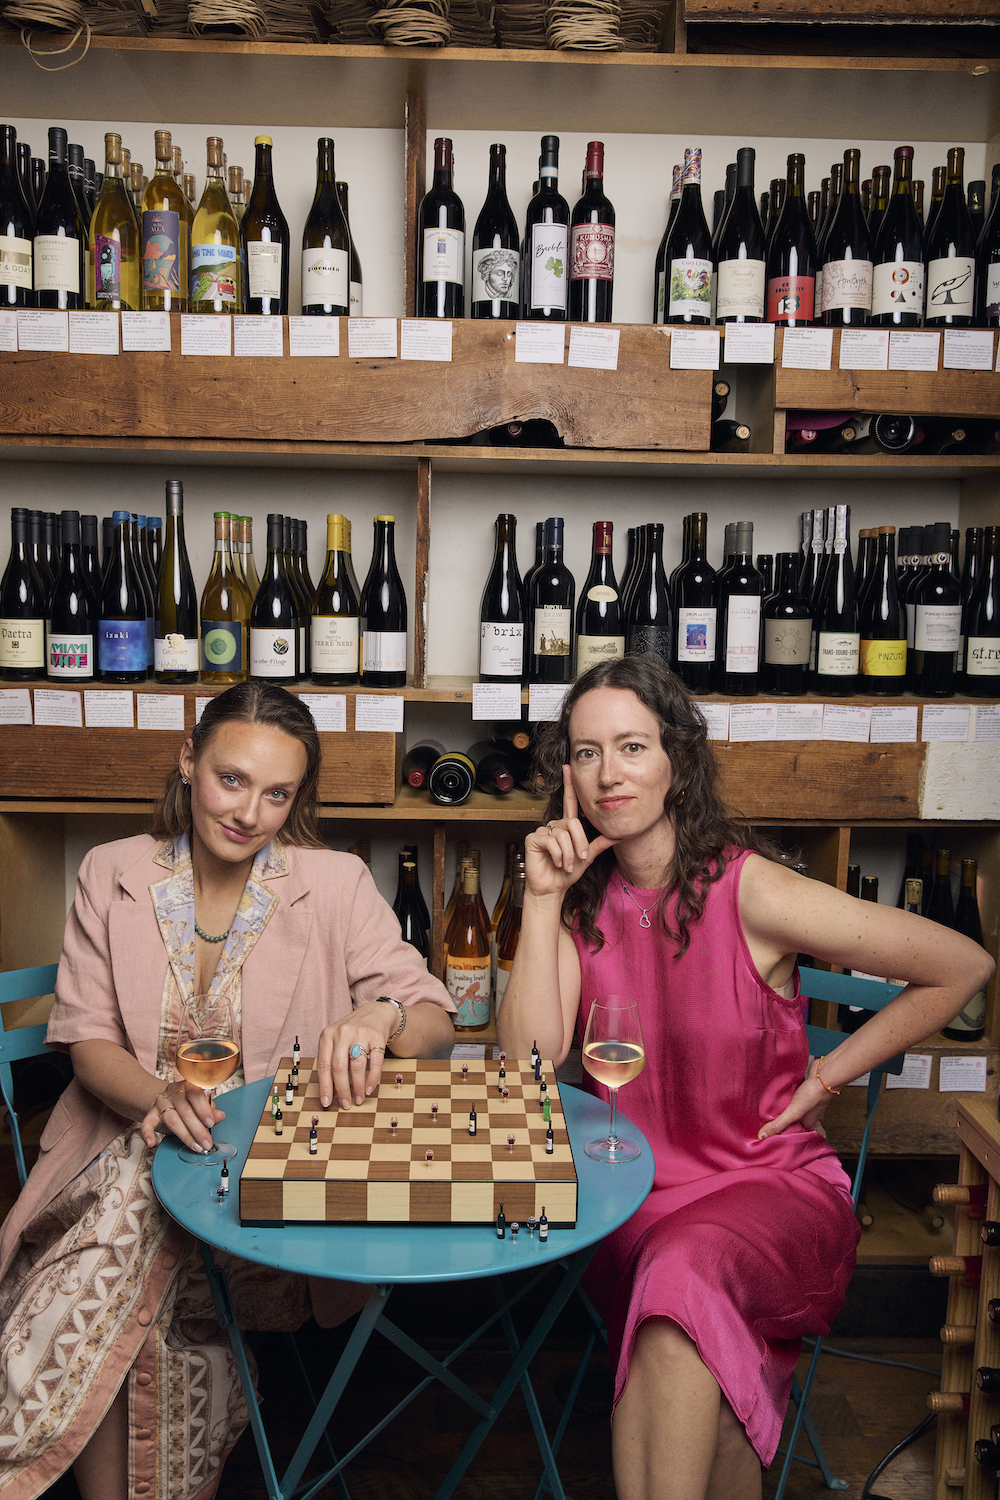 Chelsea Coleman and Coco Randolph, the founders of San Diego restaurants and bars Mabel's Gone Fishing, The Rose, and Rosetta Bodega, in a wine bar playing chess